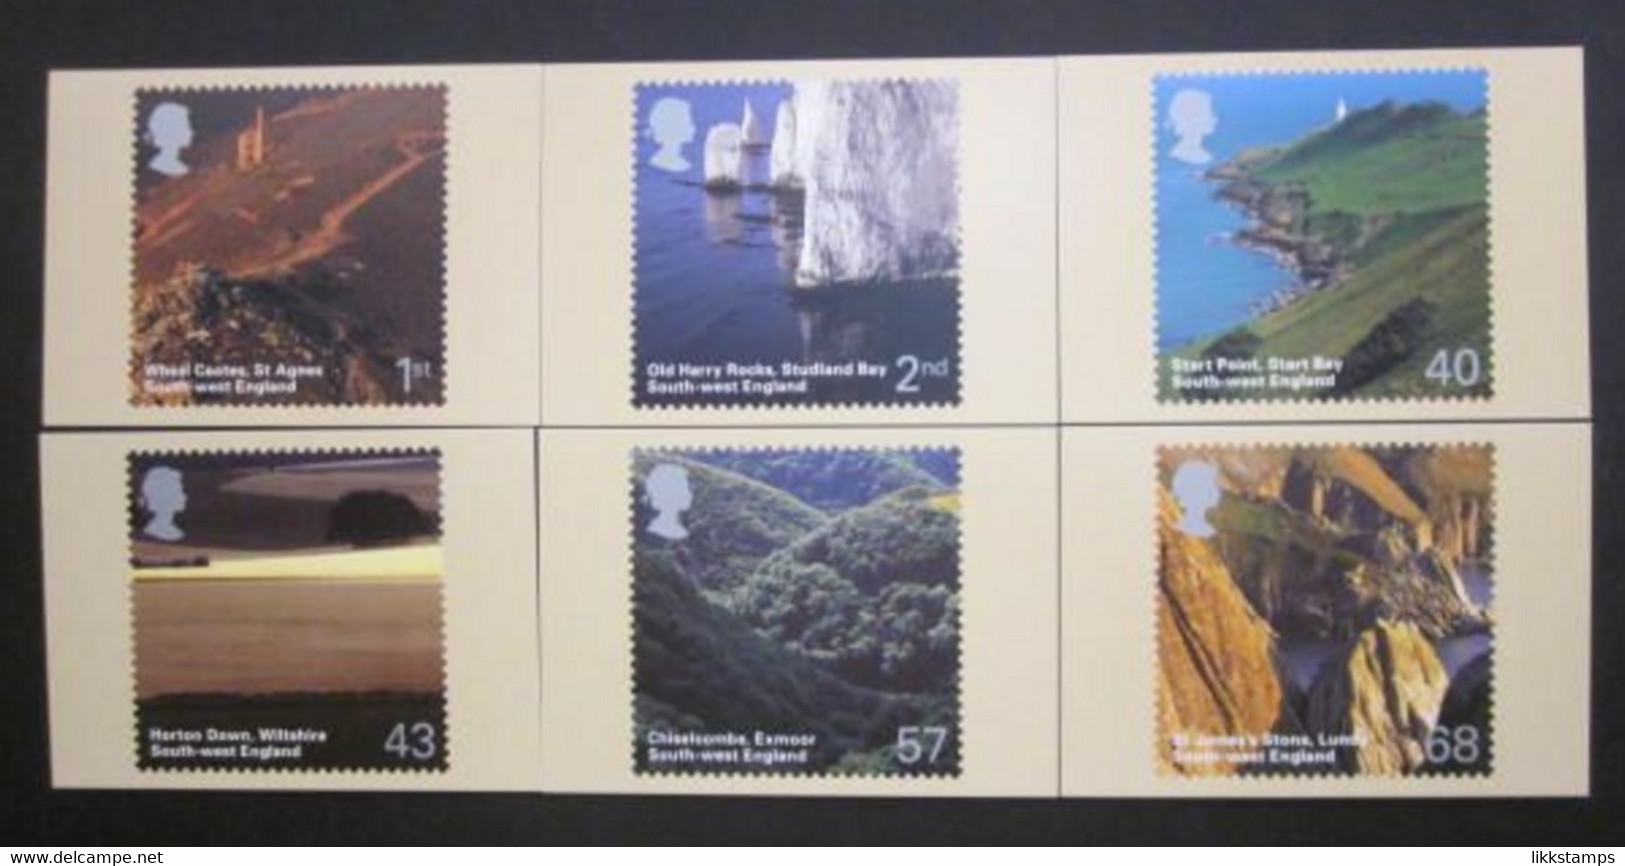 2005 SOUTH WEST ENGLAND P.H.Q. CARDS UNUSED, ISSUE No. 272 (B) #00844 - Tarjetas PHQ